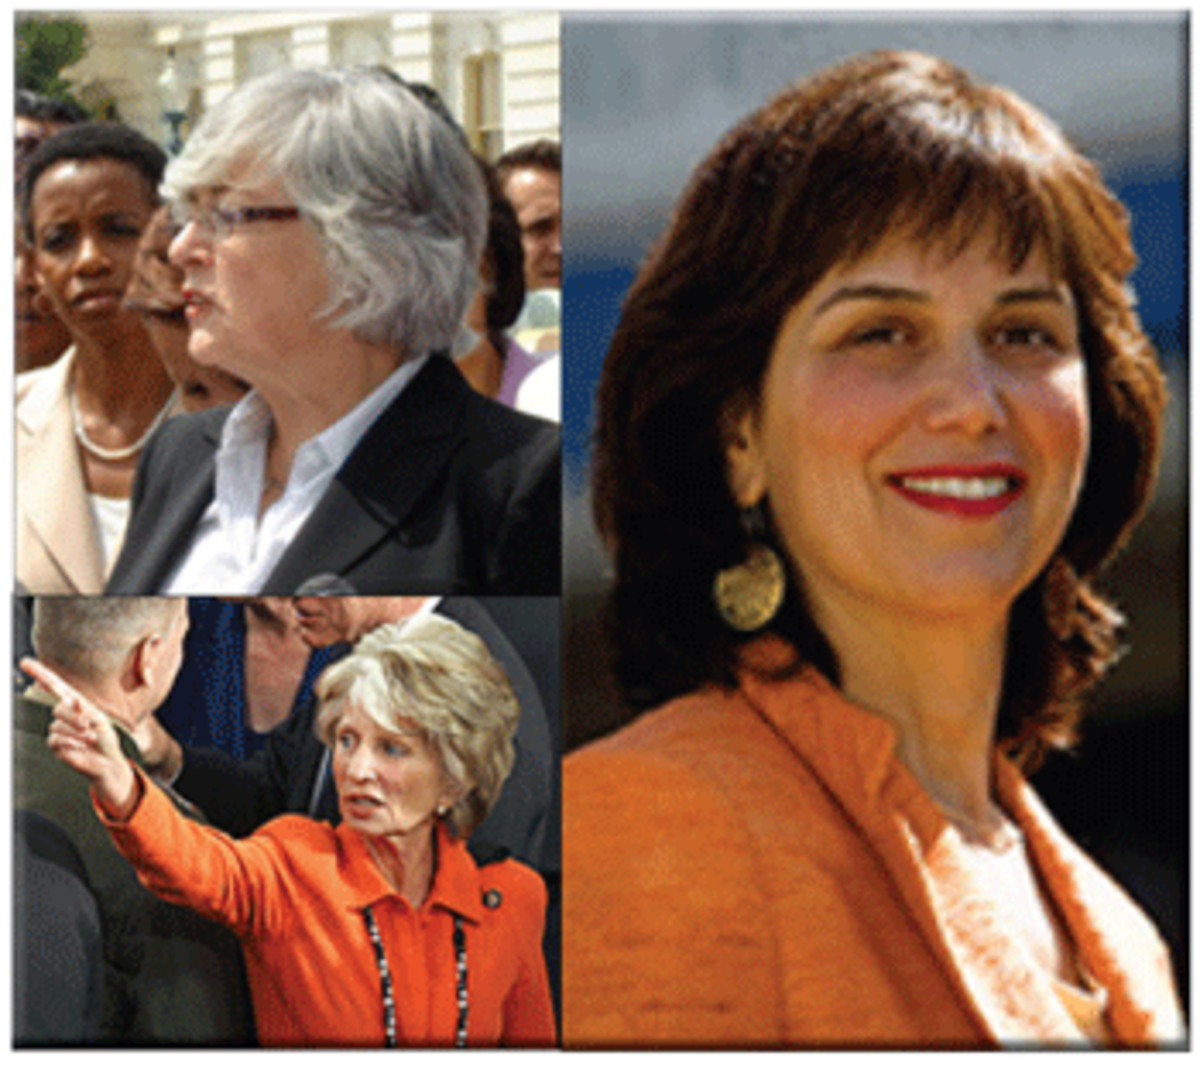 Rep. Lynn Woolsey (D-Marin) top left; Rep. Jane Harman (D-Palos Verdes) bottom left; Candidate Marcy Winograd, right.